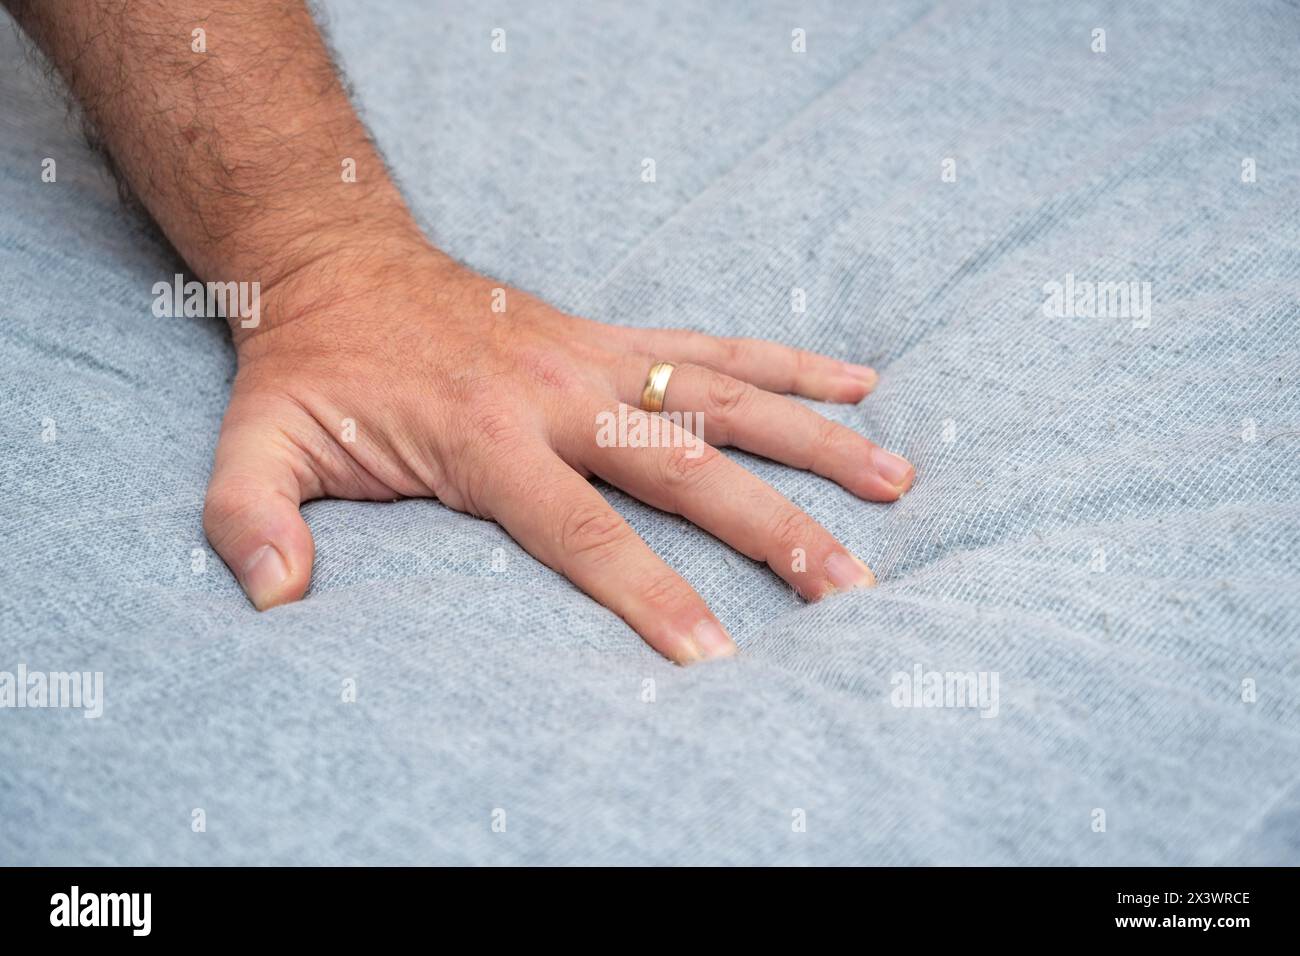 The man checks the quality and softness of the new mattress he will buy by pressing it with his hand Stock Photo